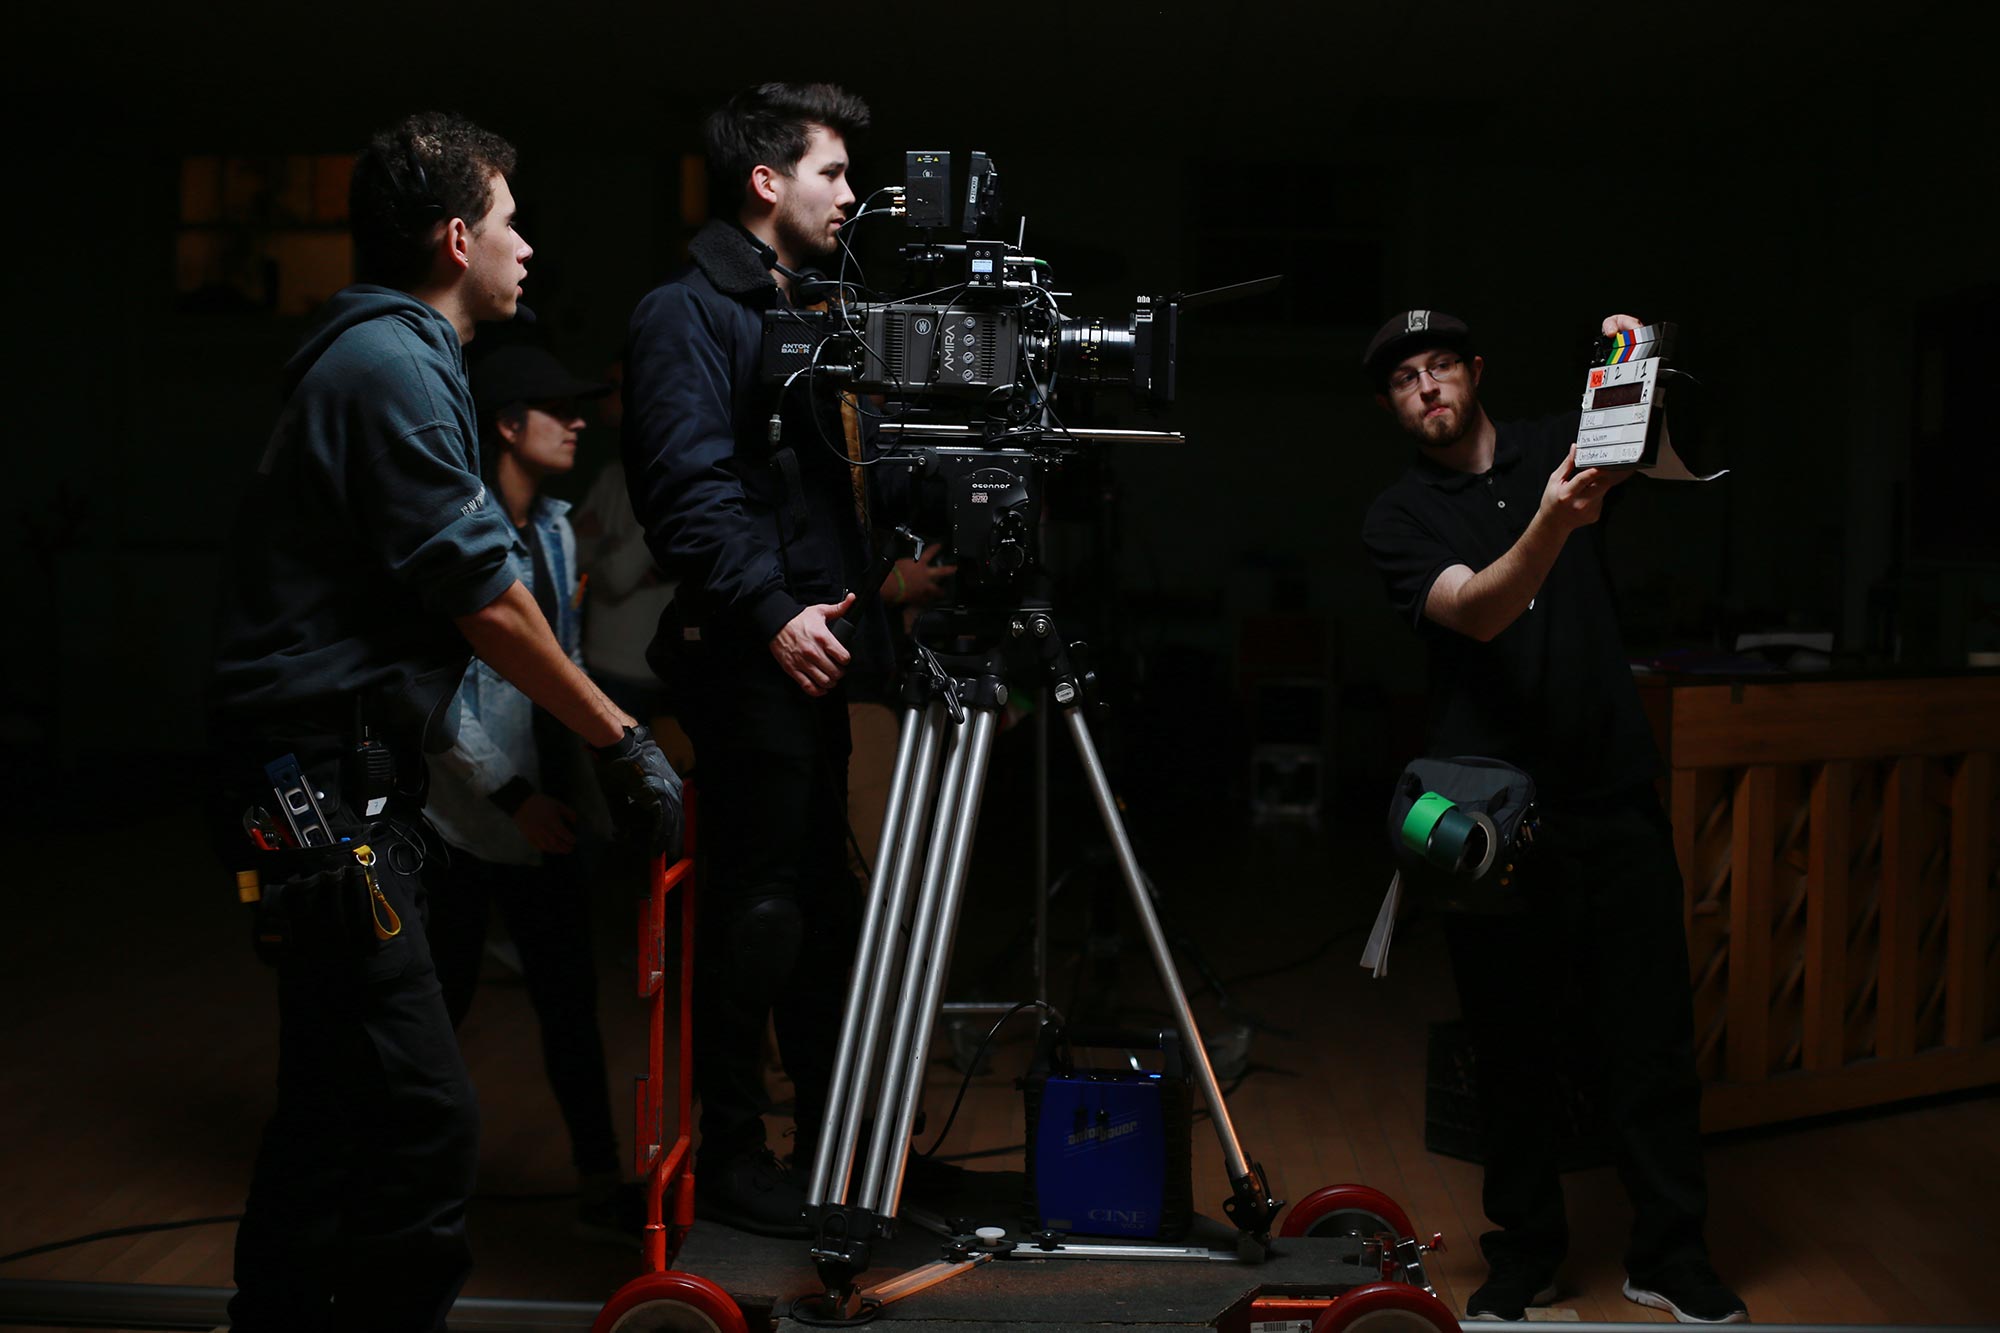 Gul Day film crew working with a video camera